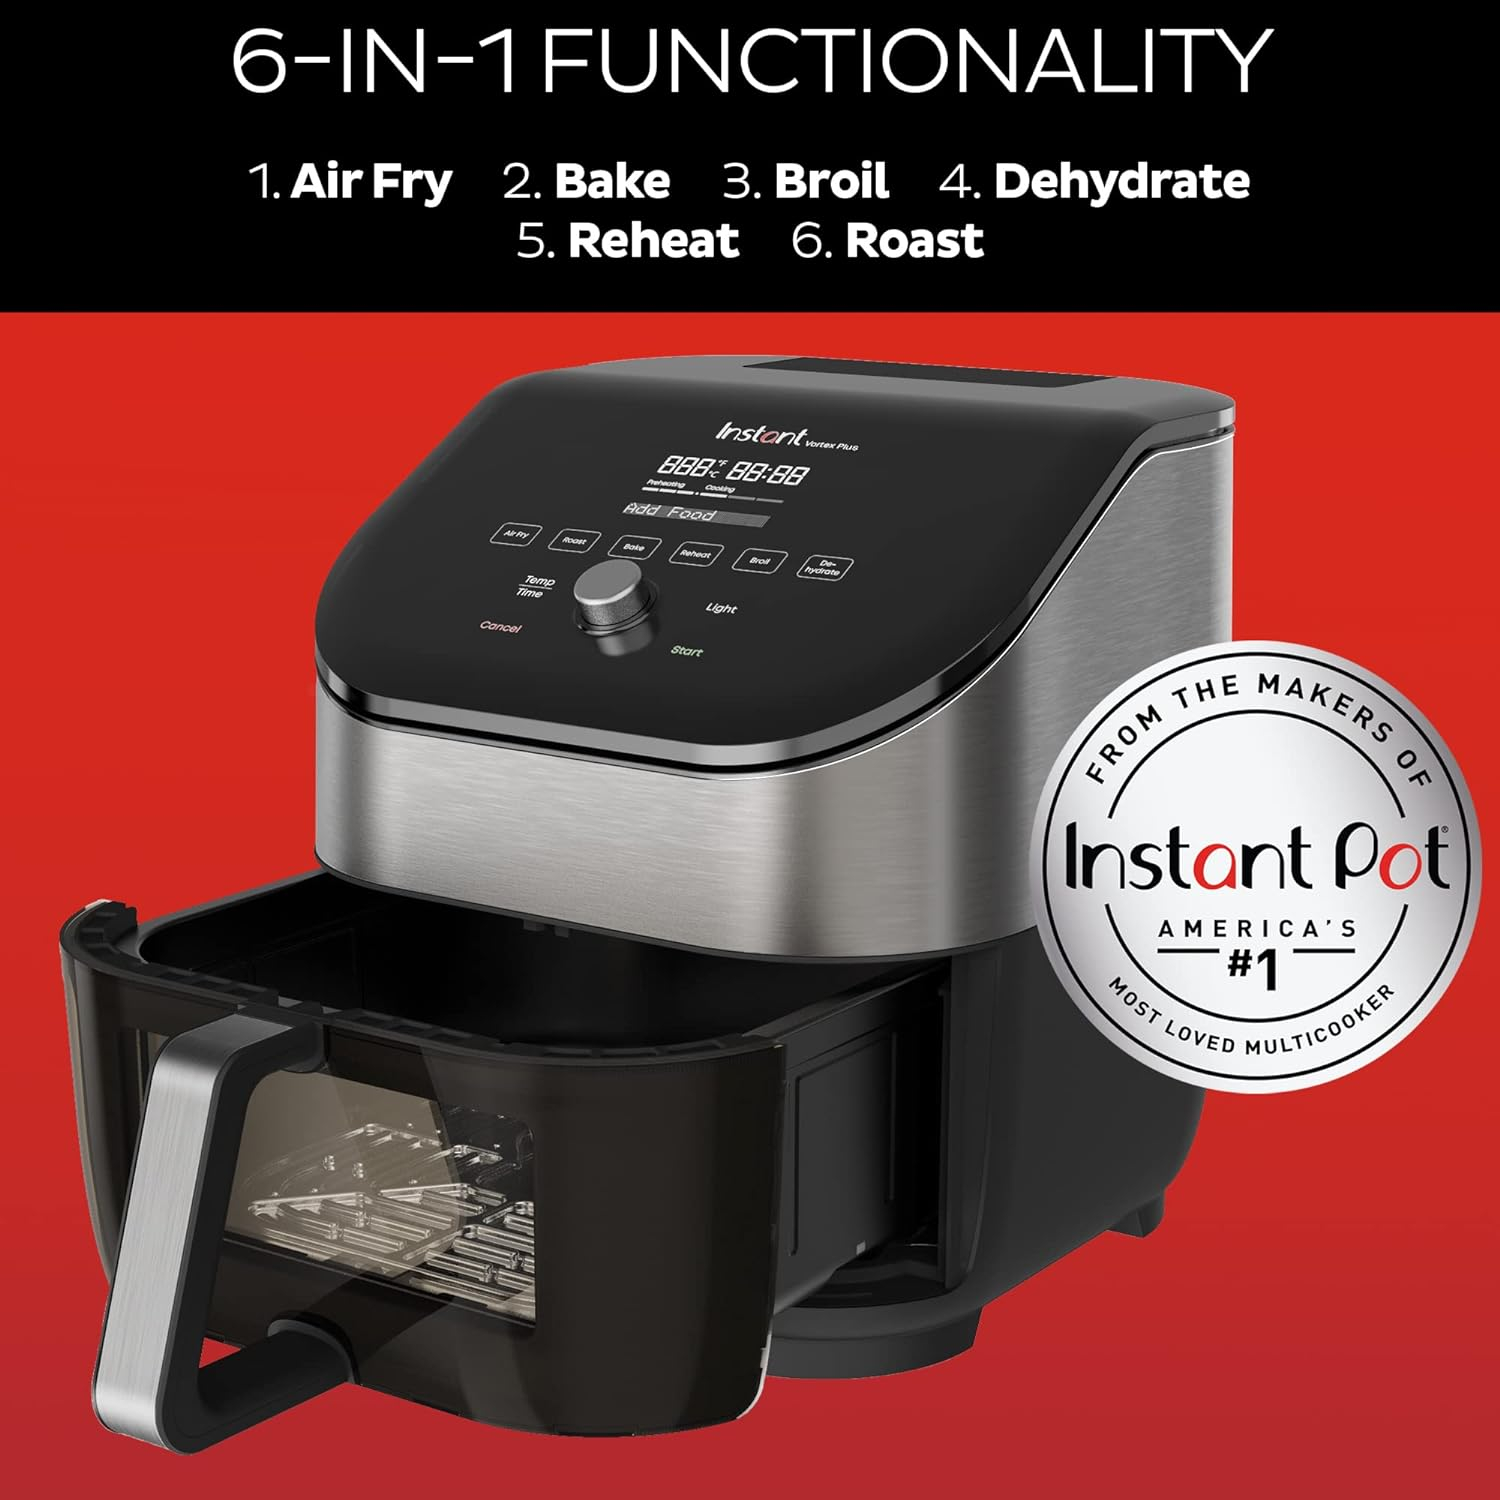 Instant Pot Vortex Pro Air Fryer, 10 Quart, 9-in-1 Rotisserie and Convection Oven, From the Makers of Instant Pot with EvenCrisp Technology, App With Over 100 Recipes, 1500W, Stainless Steel